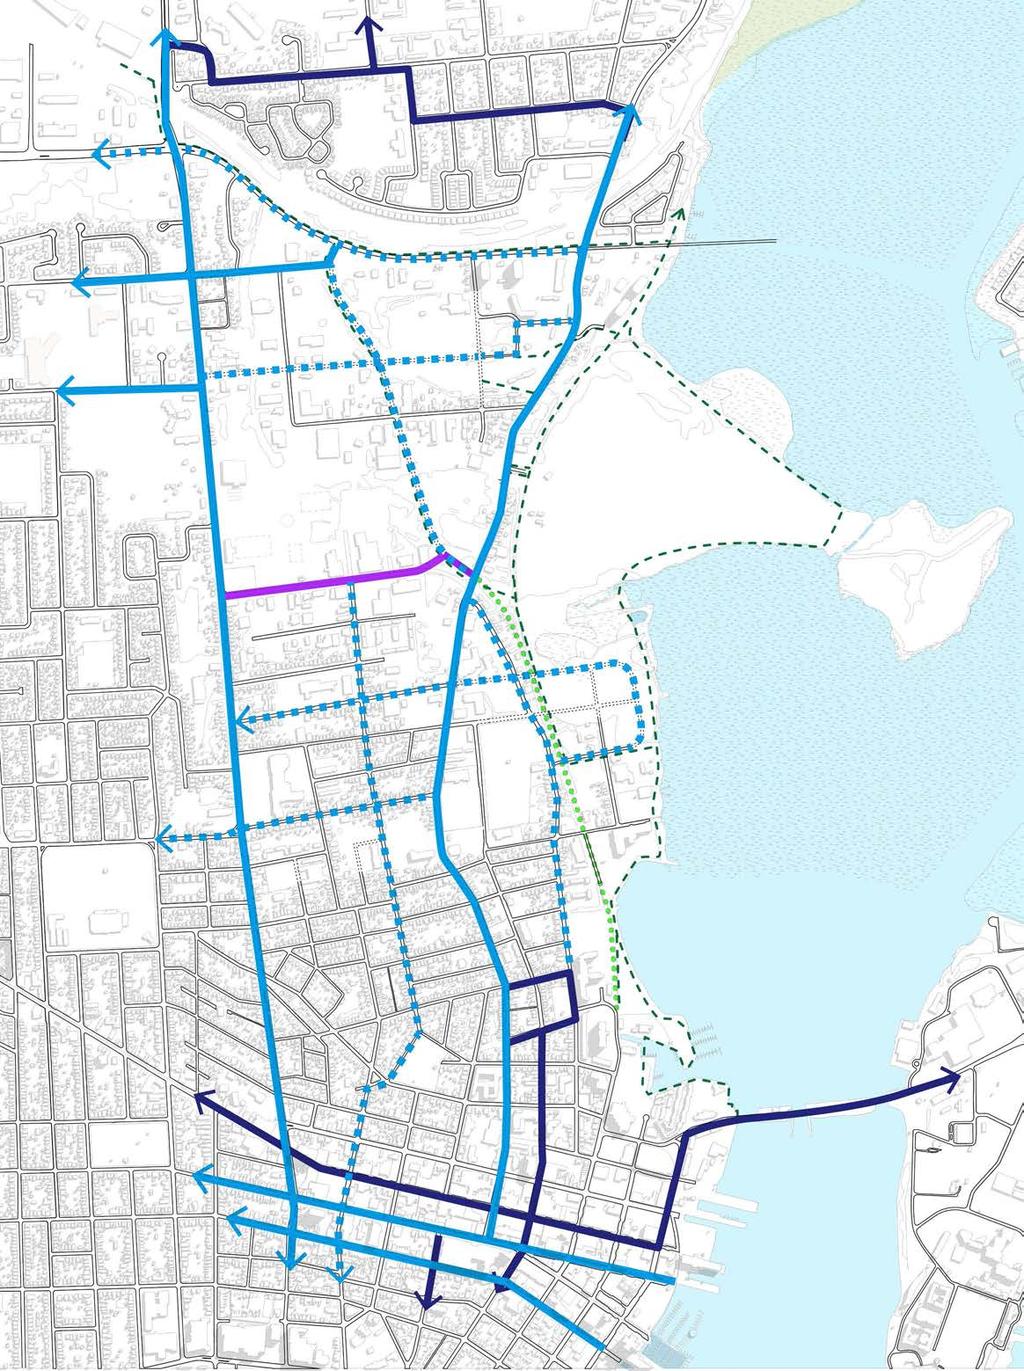 SEVENTH AVE RAILWAY ST DUFF ST FRASER ST PATRICK ST BELLE ISLAND (CATARAQUI ) Multi-Modal Corridors: Legend Design key stops along nodes and corridors to include enhanced transit infrastructure, such